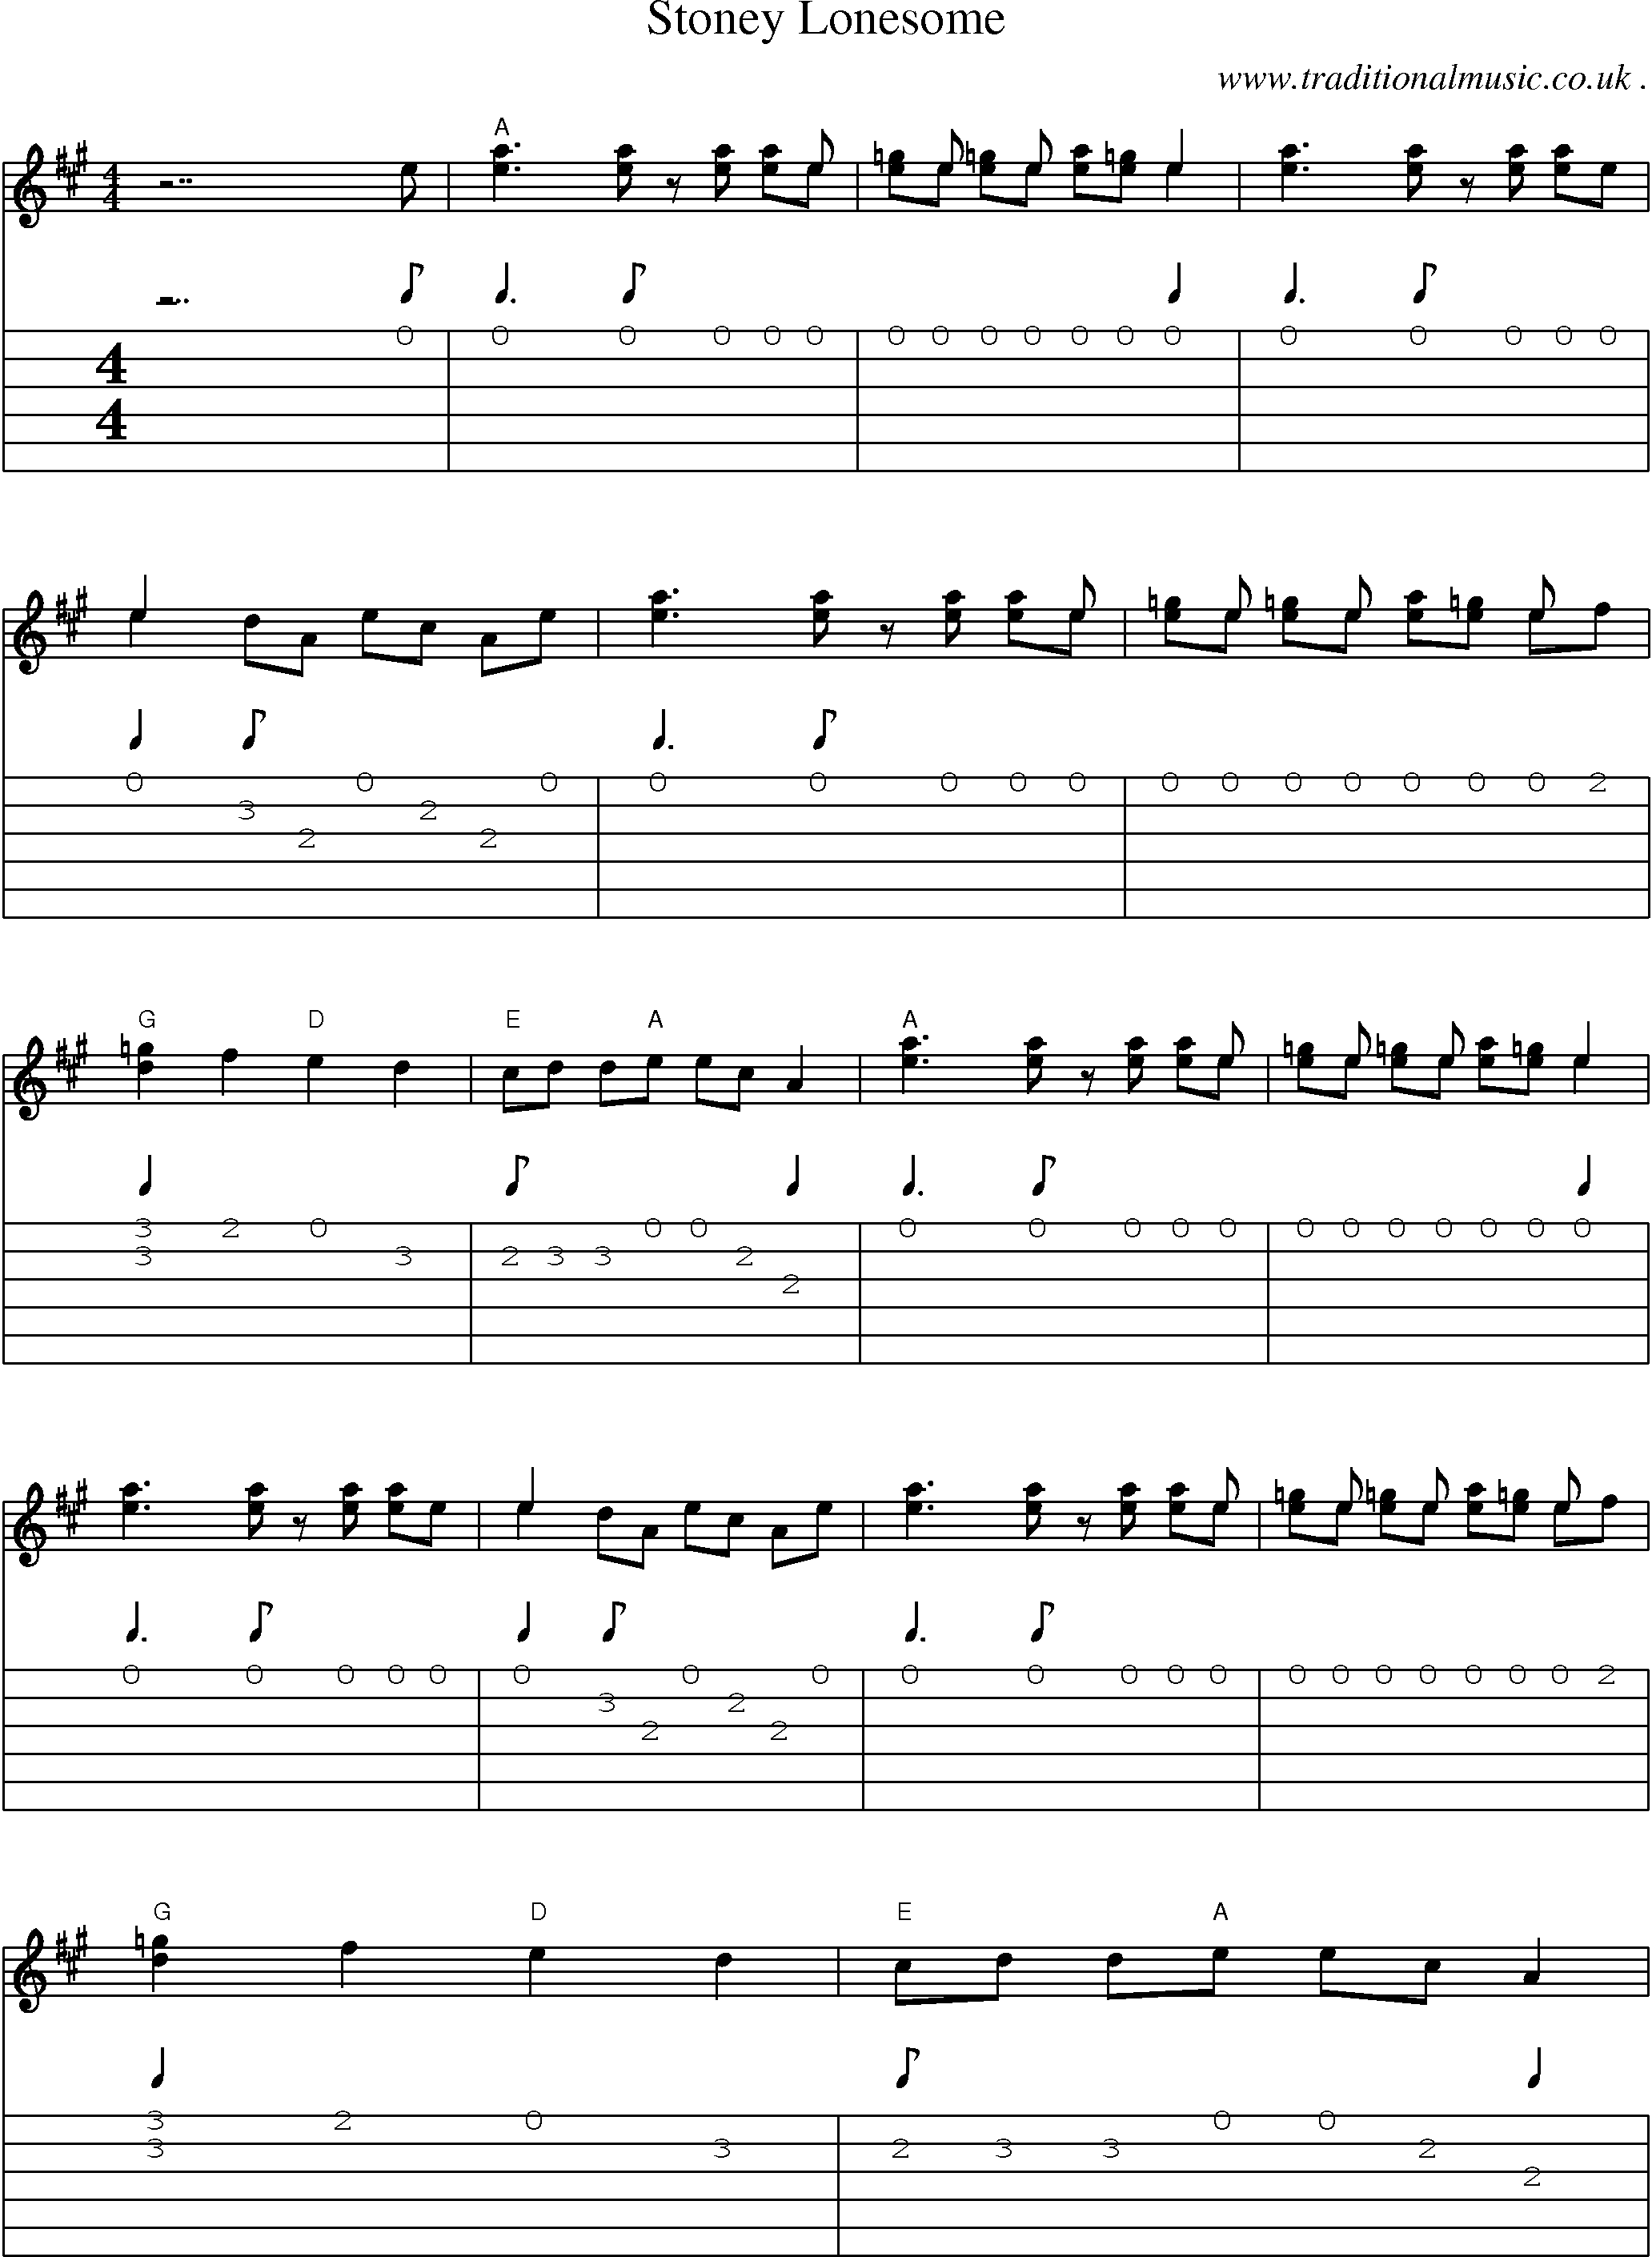 Music Score and Guitar Tabs for Stoney Lonesome